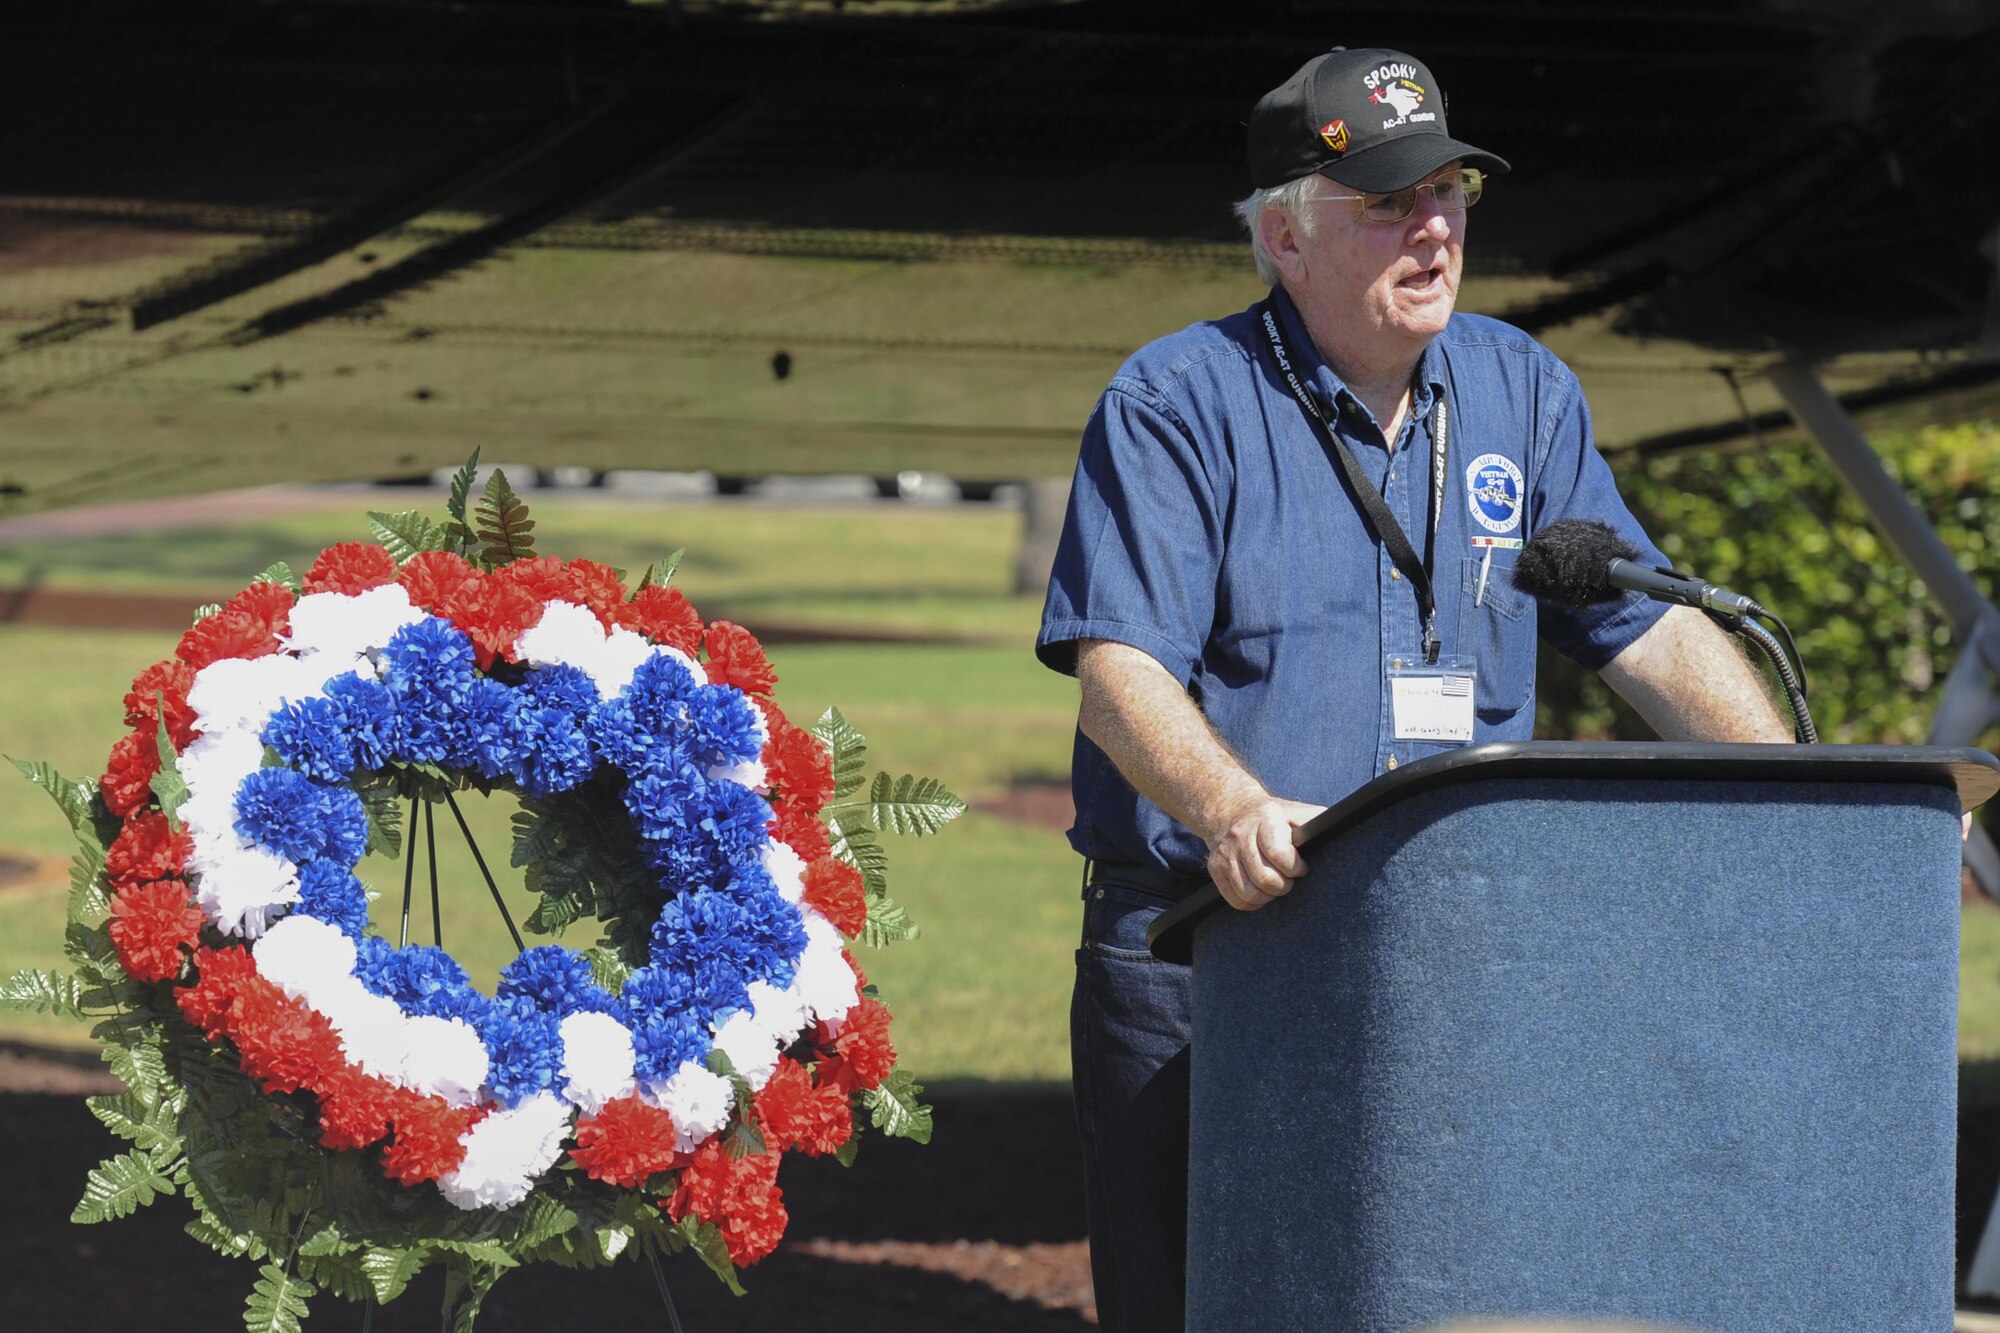 Junior Skinner, a member of the Spooky Gunship Brotherhood, speaks during a plaque dedication ceremony at the Hurlburt Field Air Park, Fla., Sept. 9, 2016. The Spooky brotherhood purchased a memorial plaque with the names of fallen AC-47 crewmembers, who served in Southeast Asia. The memorial plaque was dedicated during a ceremony at the Hurlburt Field Air Park. (U.S. Air Force photo by Airman Dennis Spain)